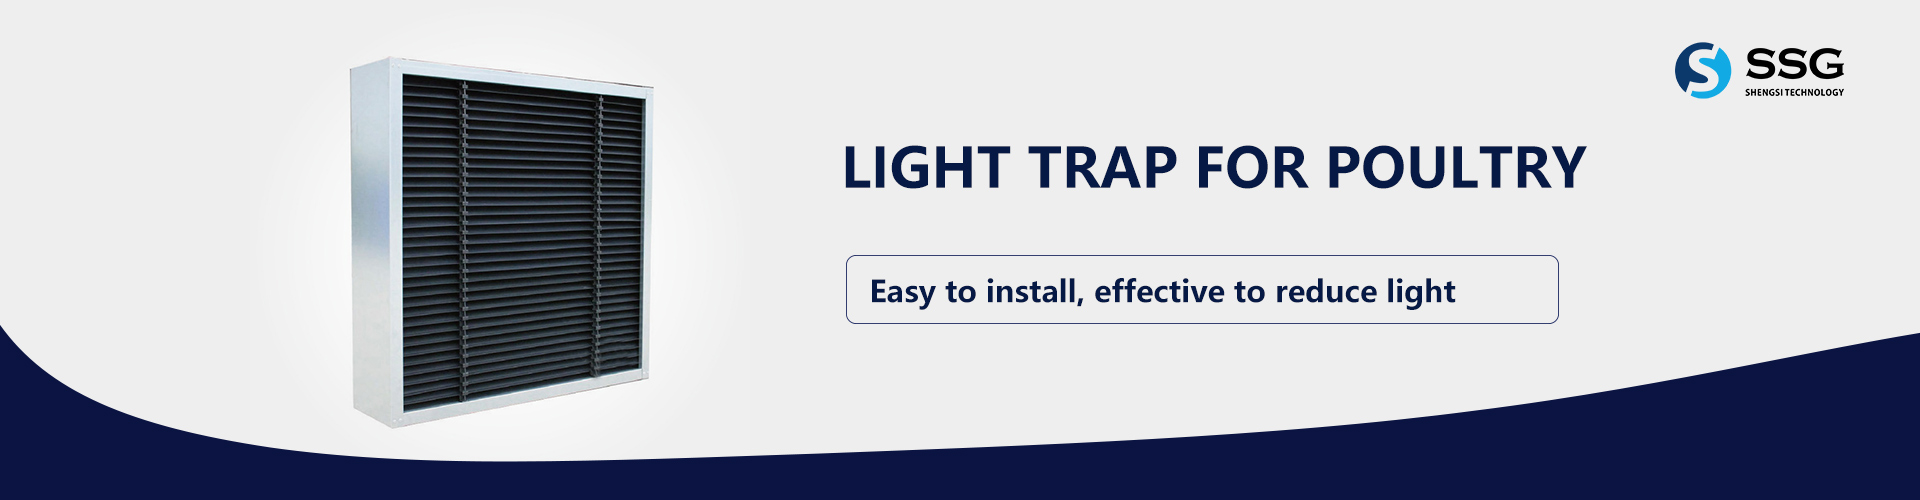 LIGHT-TRAP-FOR-POULTRY--banner